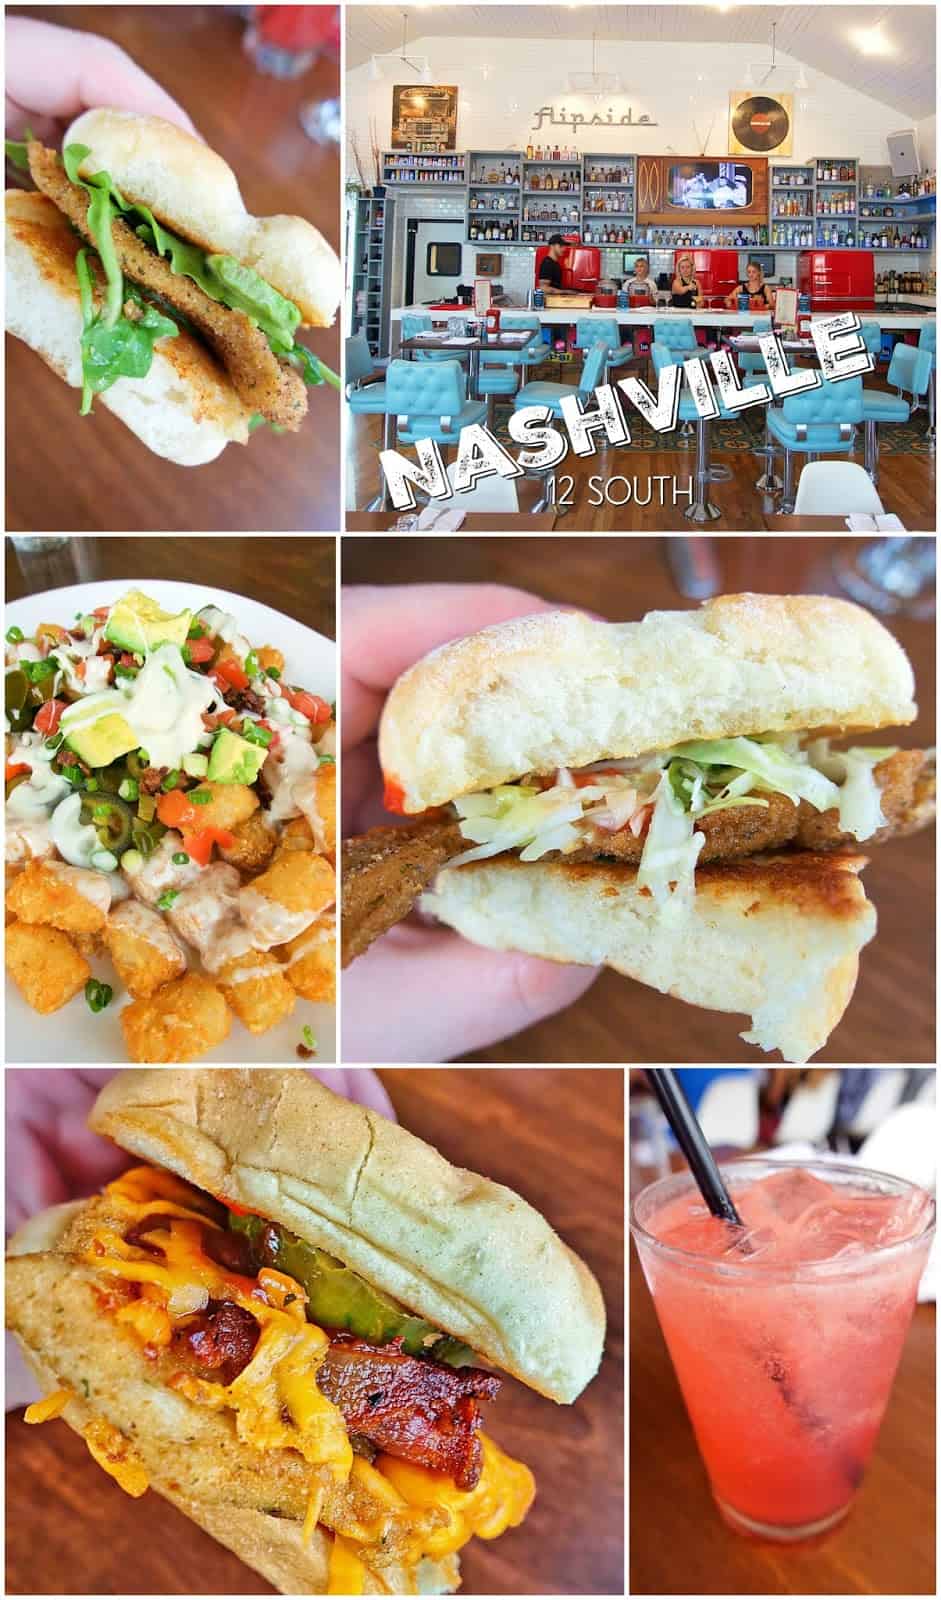 The Flipside in Nashville's 12 South neighborhood - incredible chicken sandwiches and the Tater Tot Nachos are not to be missed!